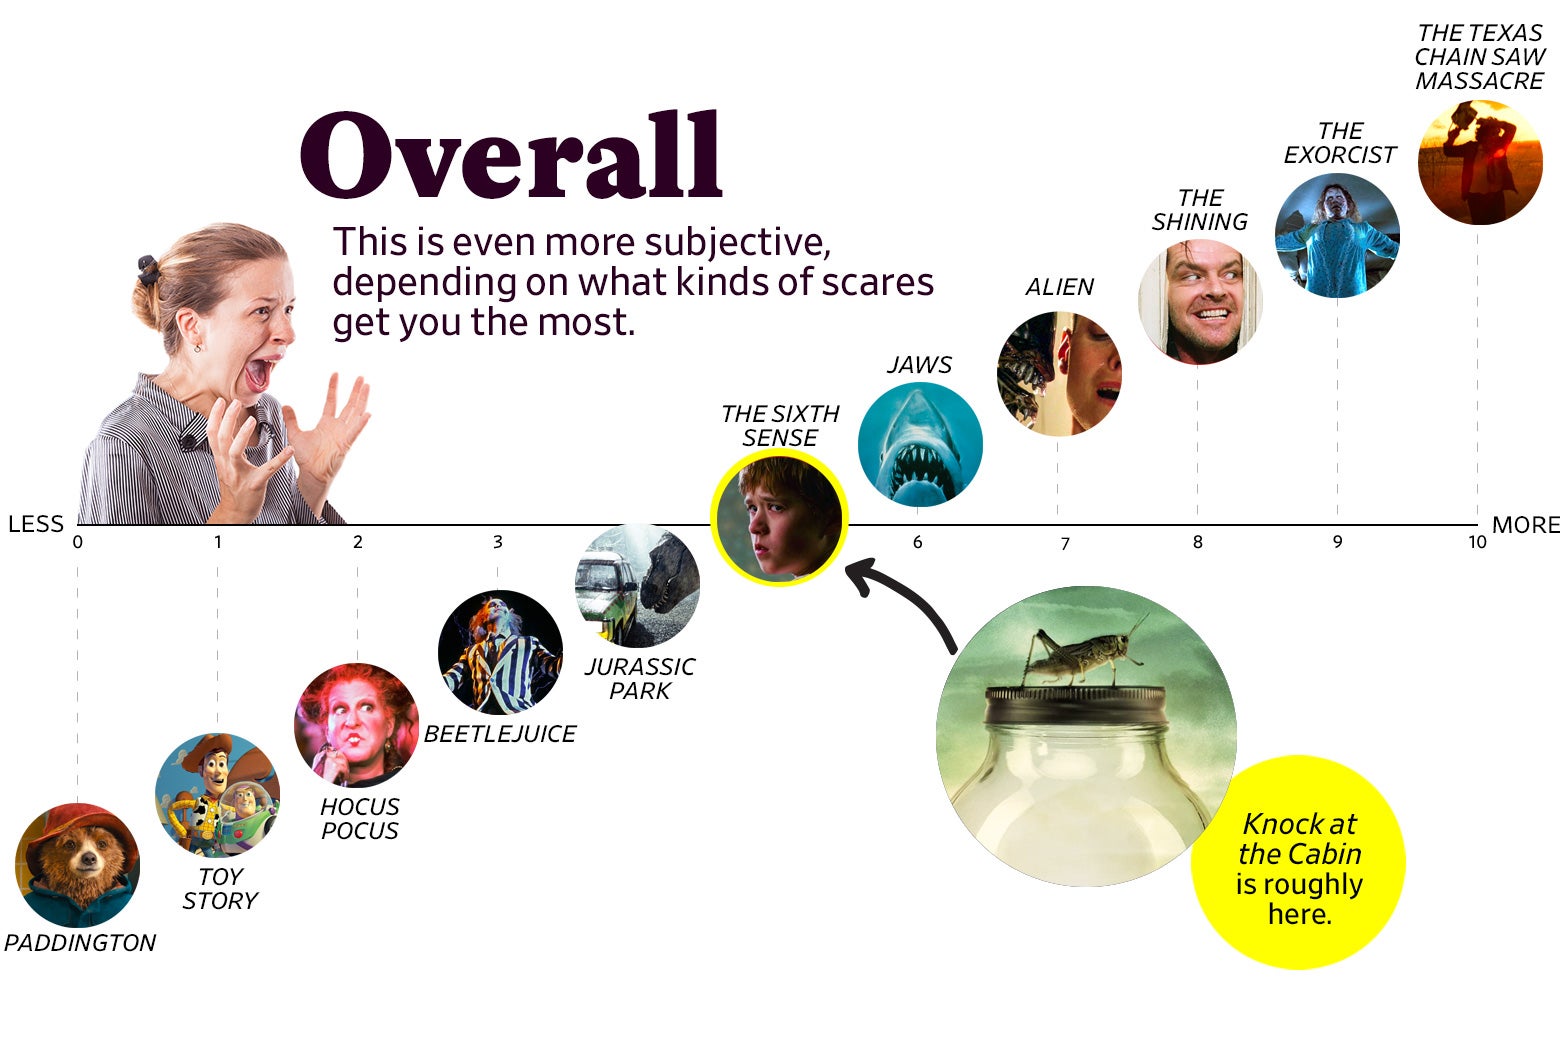 A chart titled “Overall: This is even more subjective, depending on what kinds of scares get you the most” shows that Knock at the Cabin ranks as a 5 overall, roughly the same as The Sixth Sense. The scale ranges from Paddington (0) to the original Texas Chain Saw Massacre (10). 